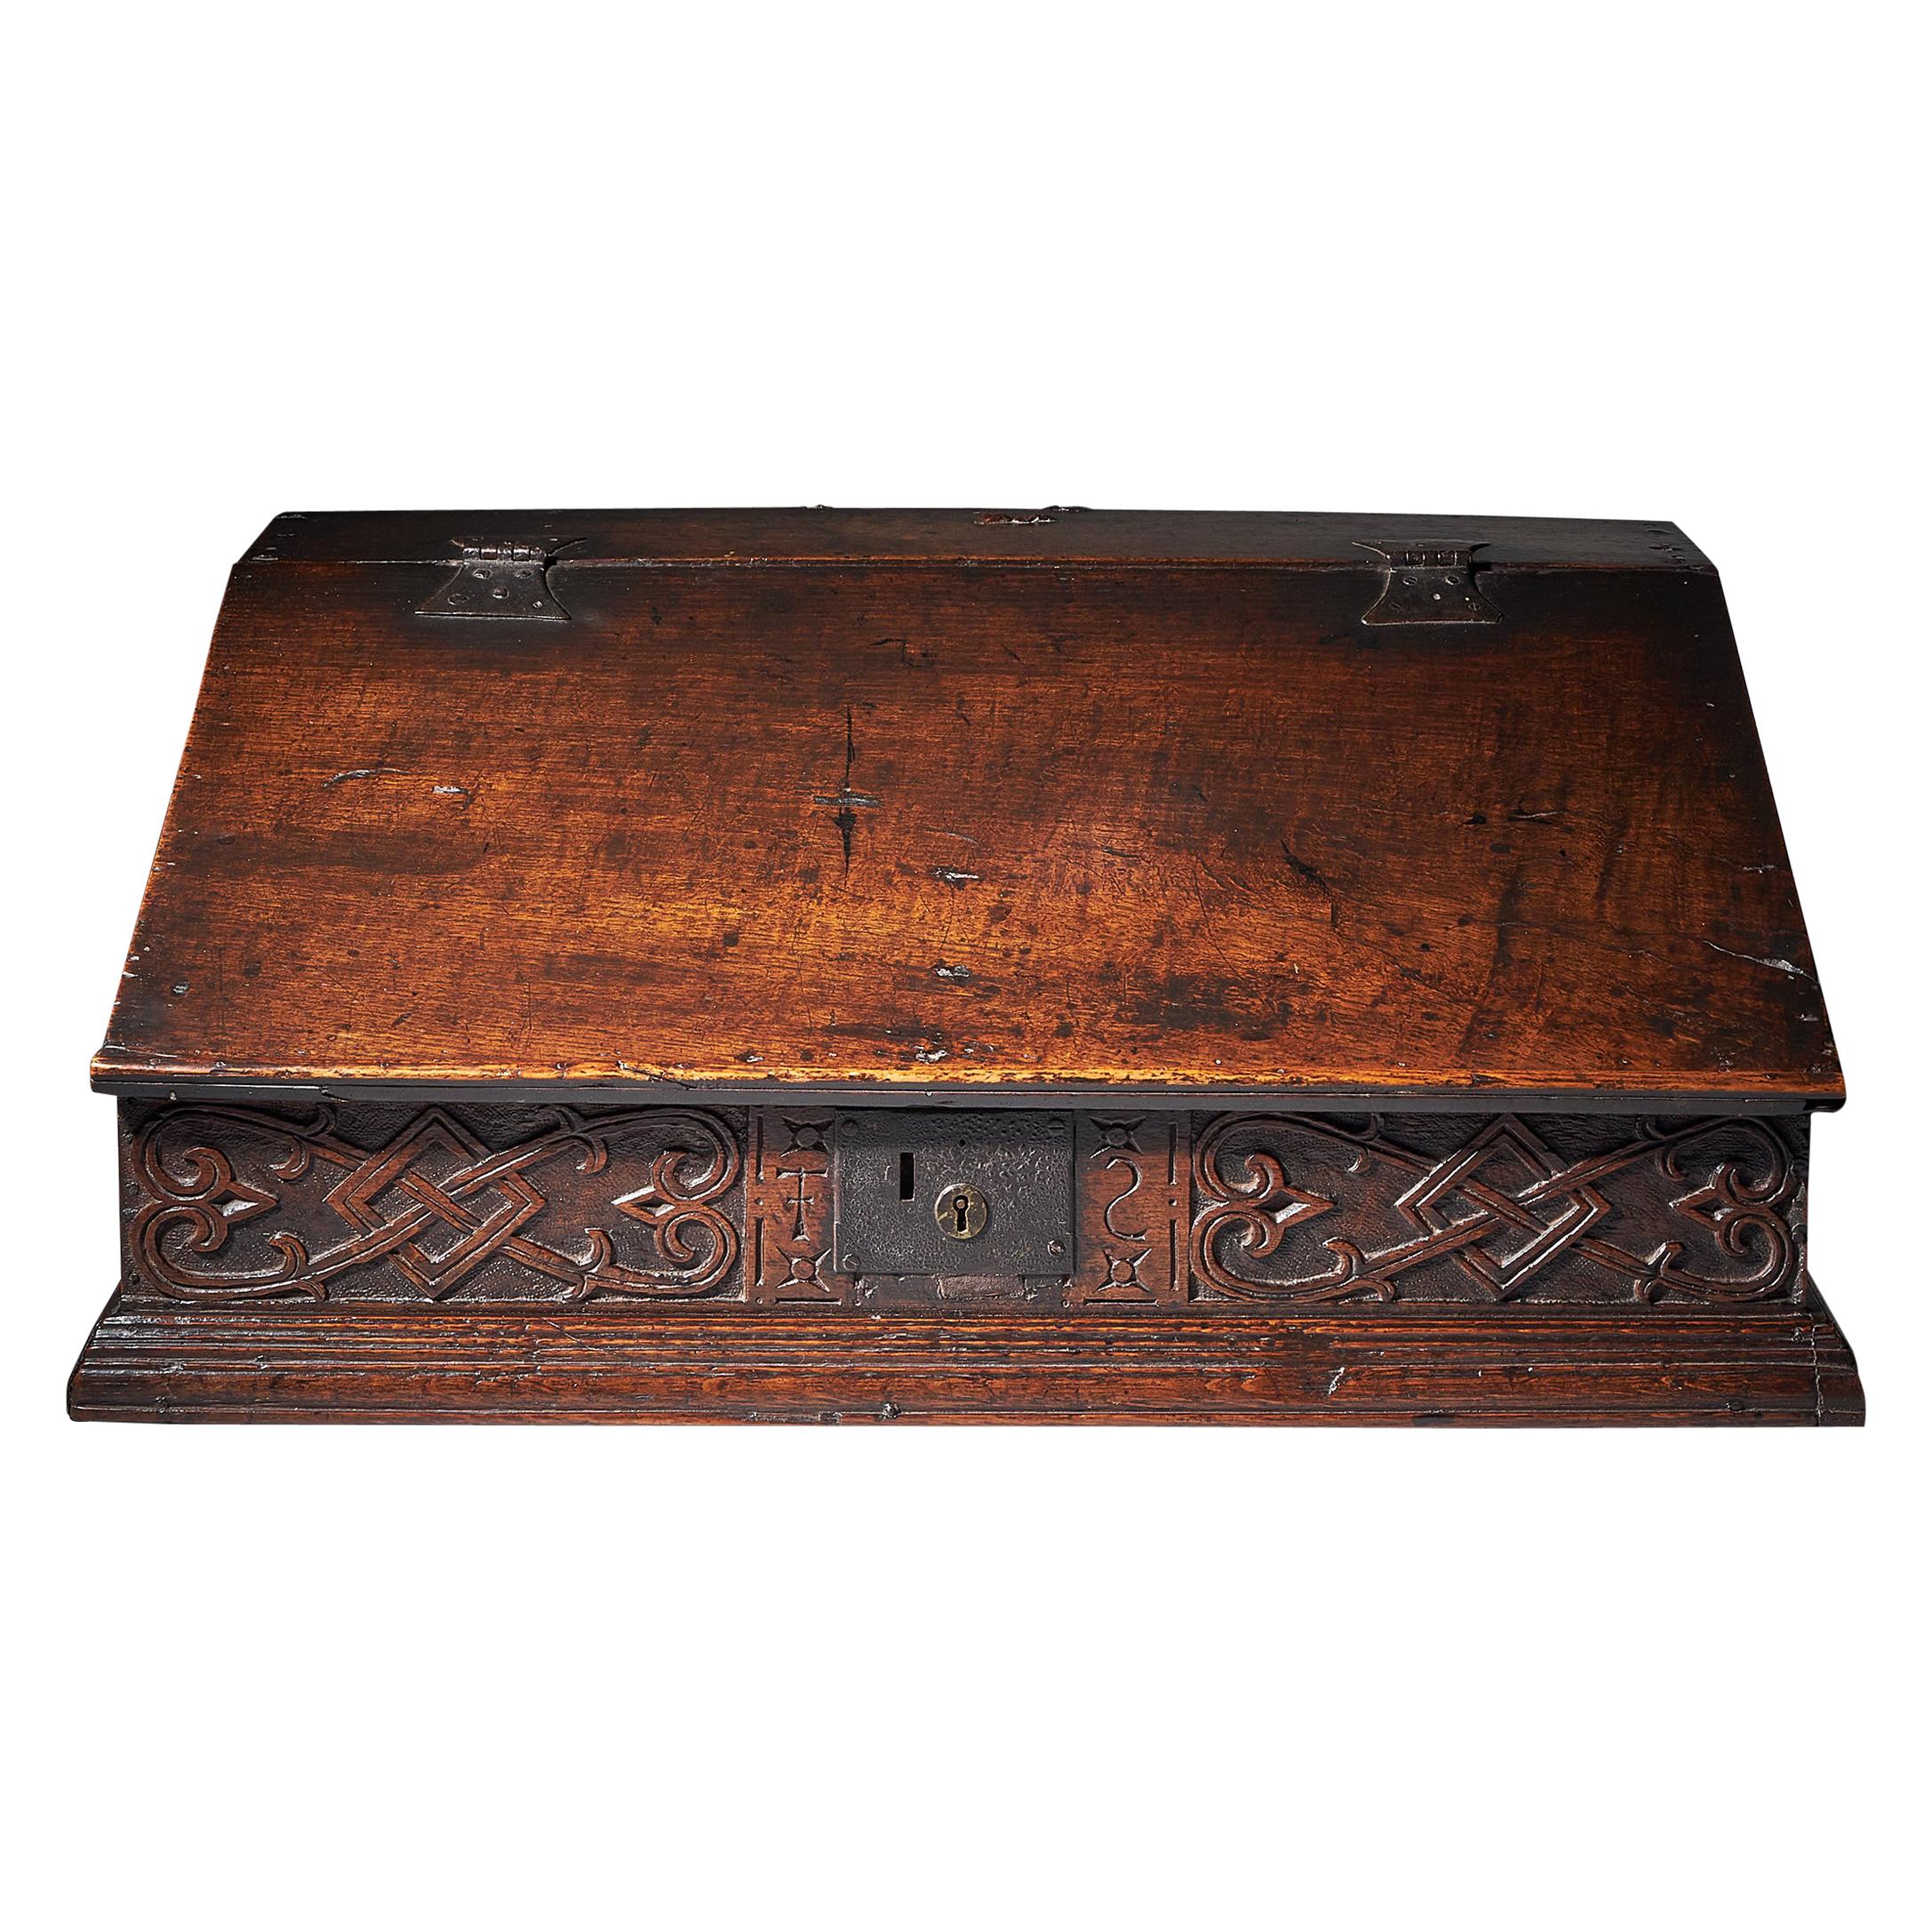 Trunk or Portable Writing Desk, 17th century